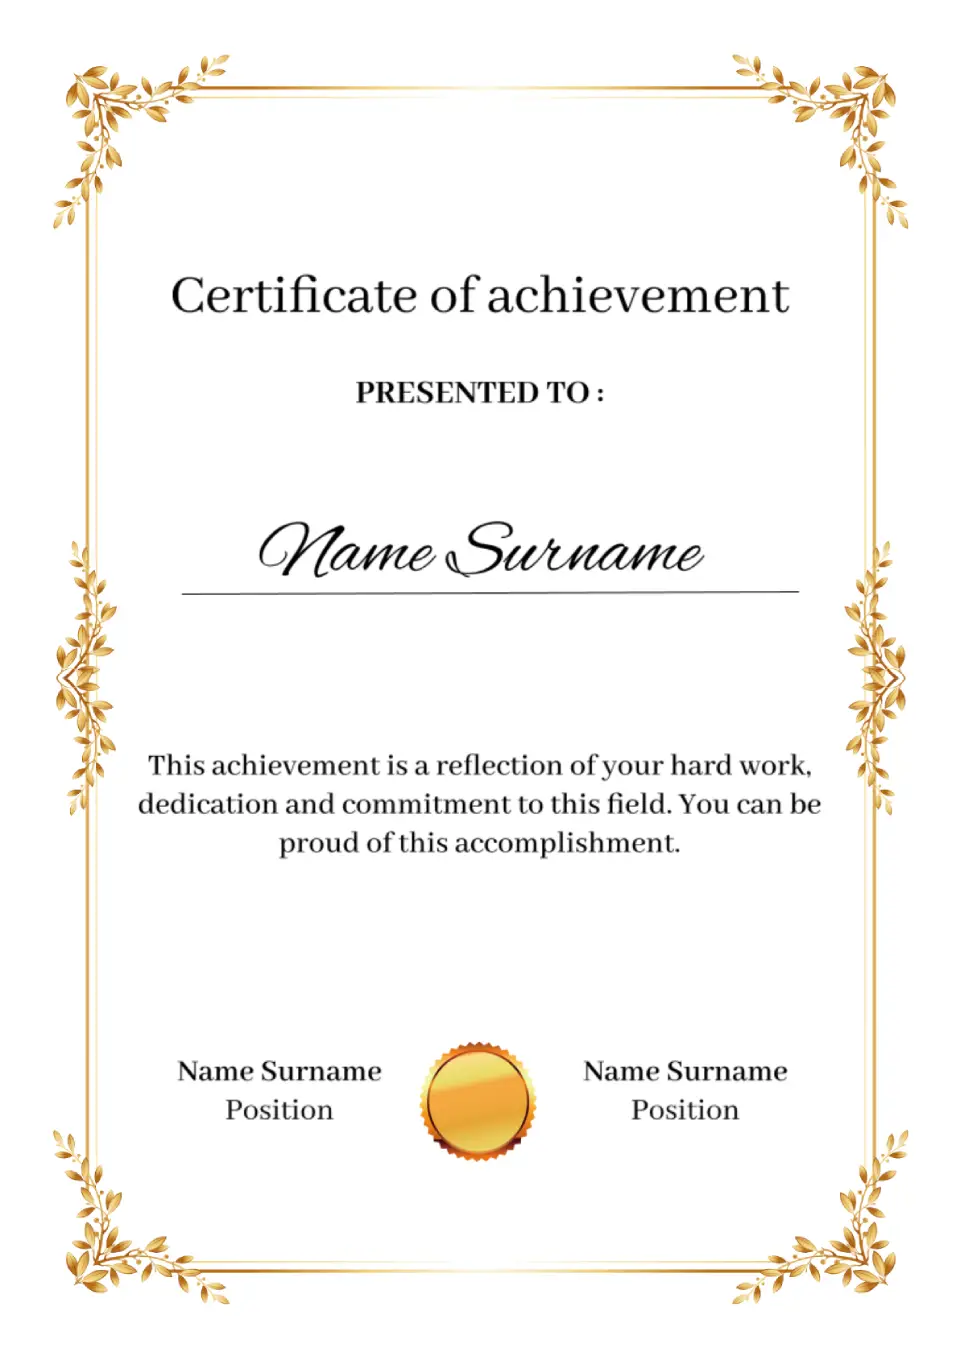 Template for Certificate of Achievement